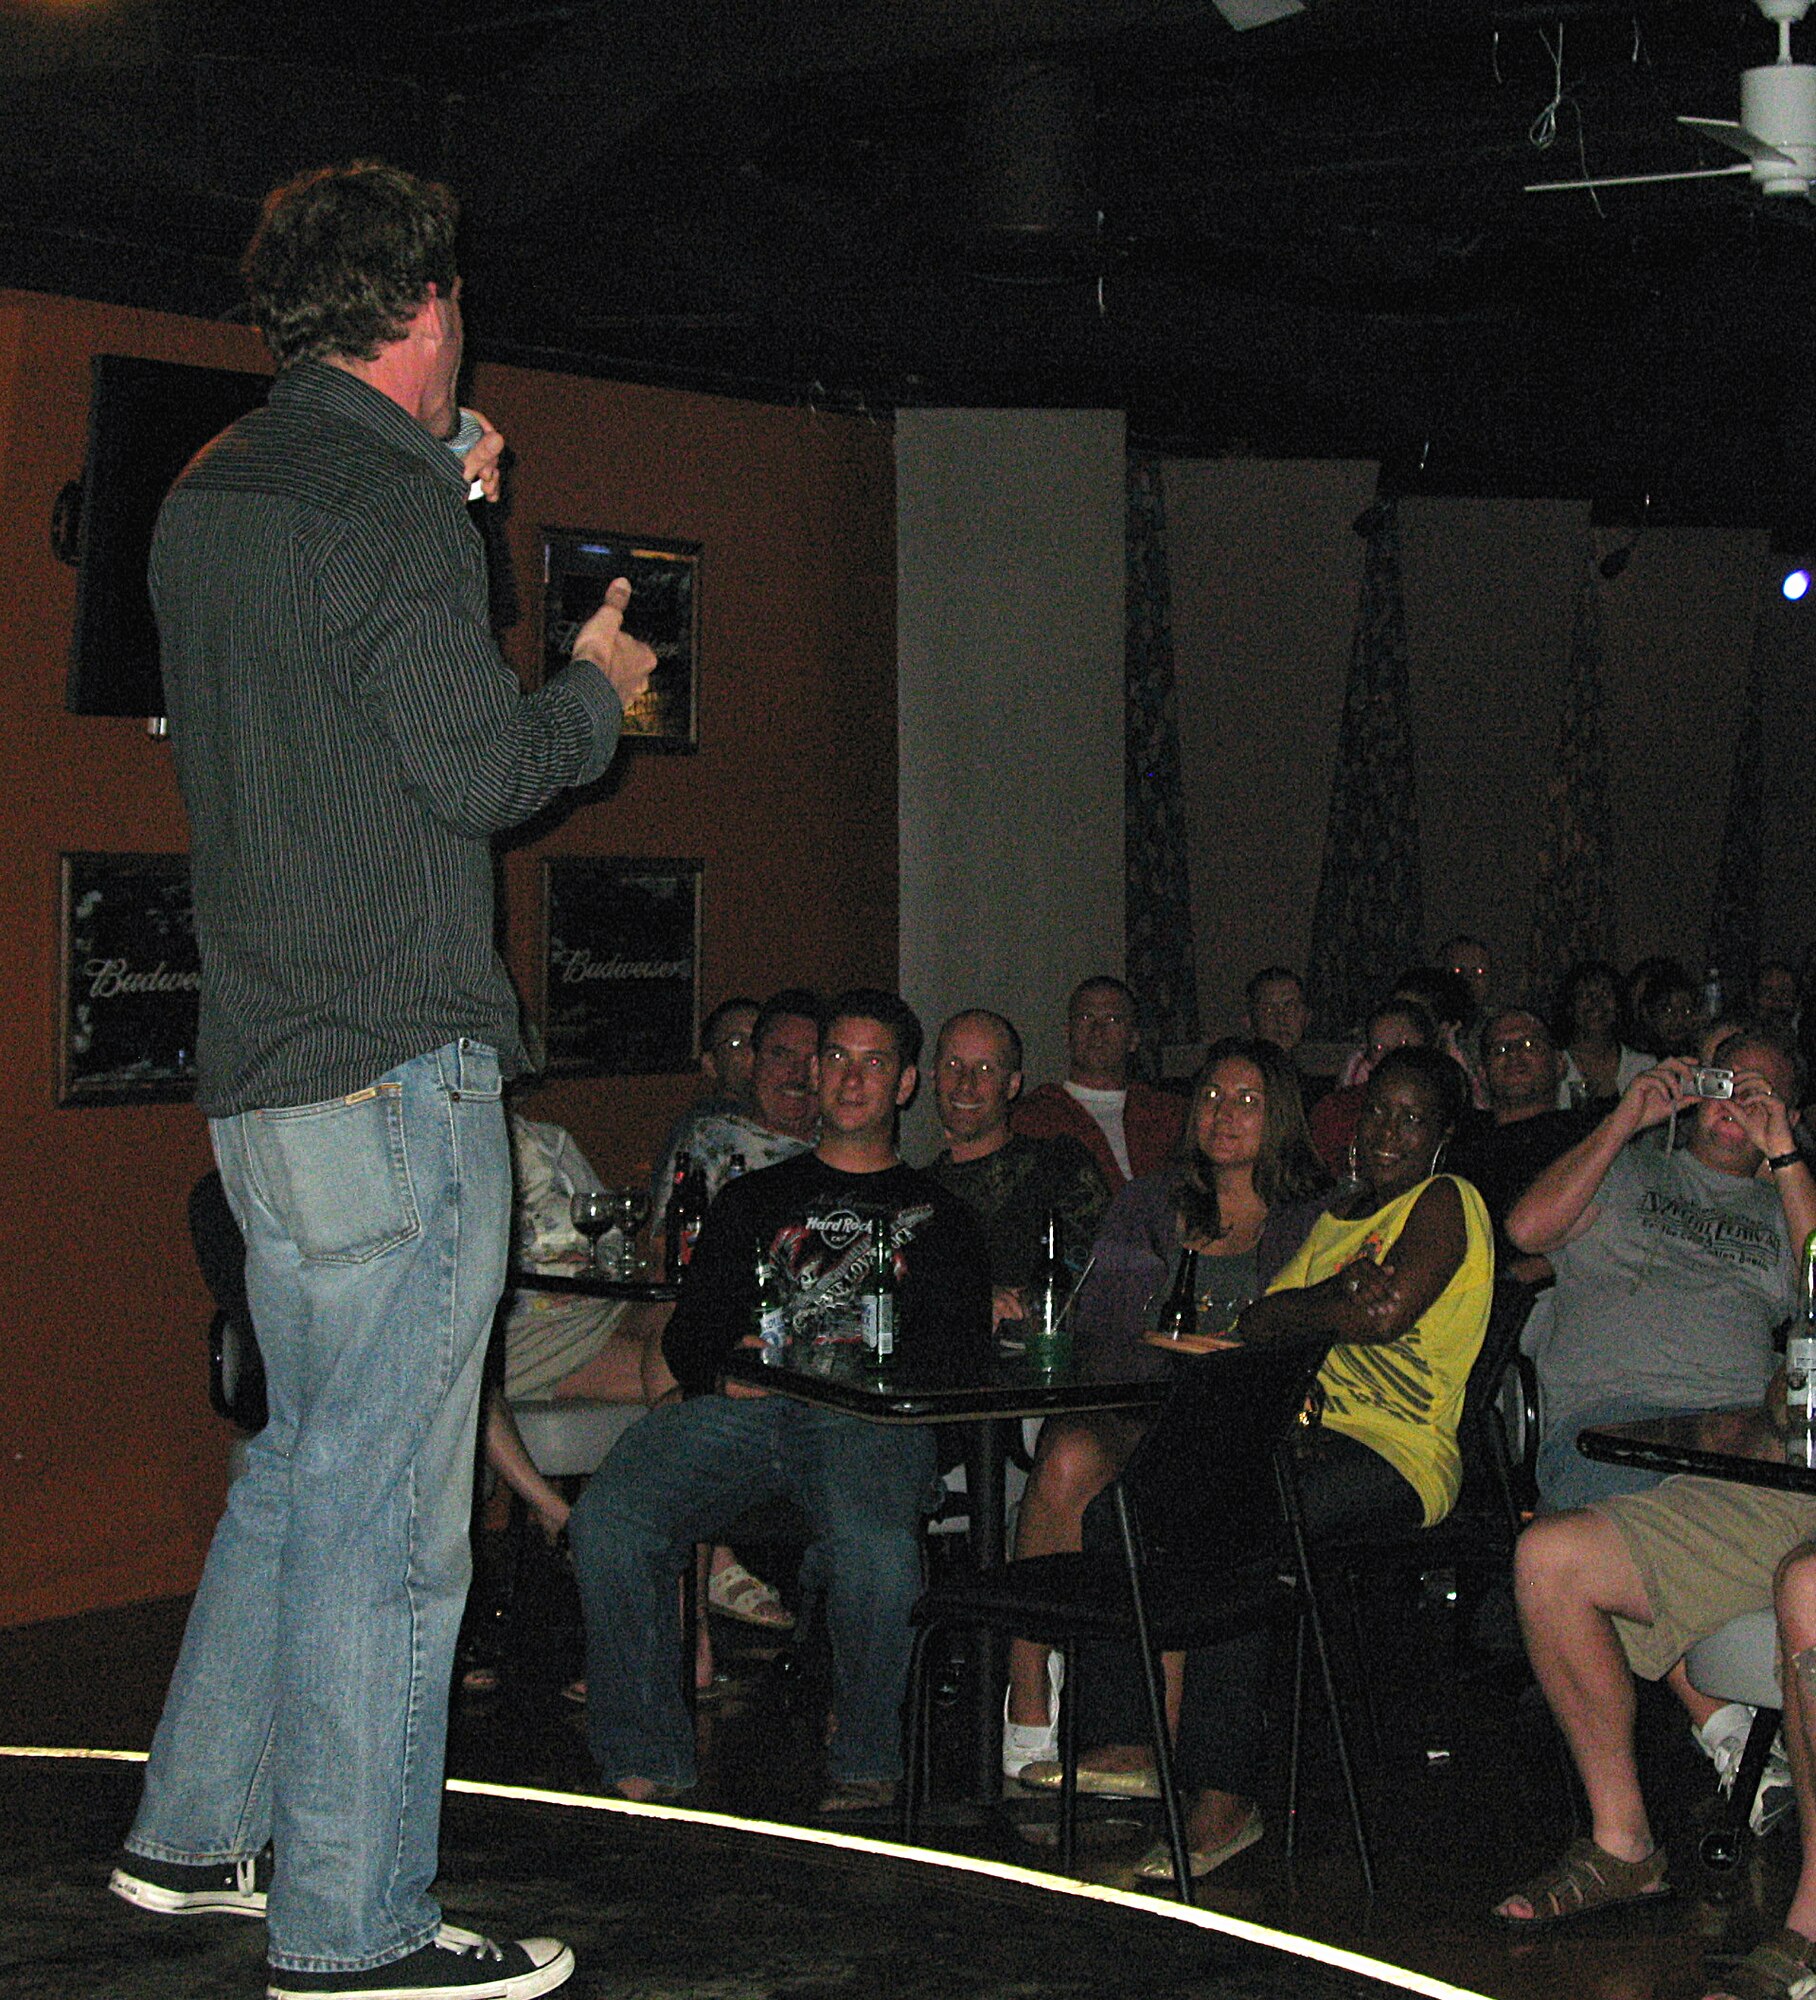 ANDERSEN AIR FORCE BASE, Guam -- Comedian Sean Ottey performs his act for a full house at Hightides Lounge Feb. 21 here. The Comedy show had approximately 150 Team Andersen members in attendance. (U.S. Air Force photo by Airman 1st Class Carissa Wolff)